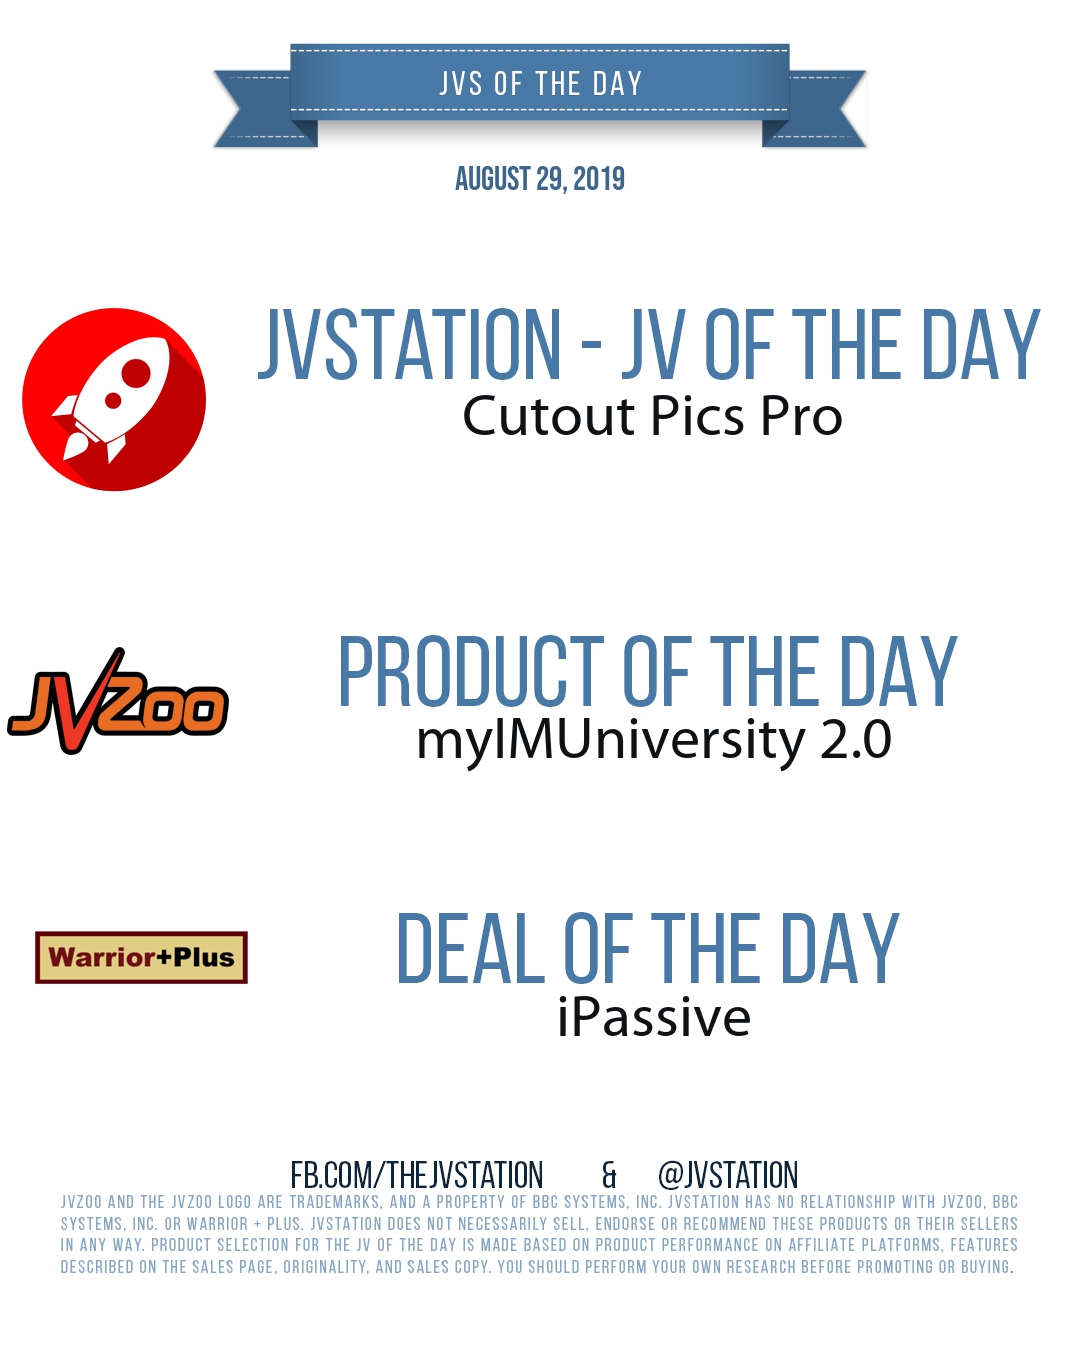 JVs of the day - August 29, 2019